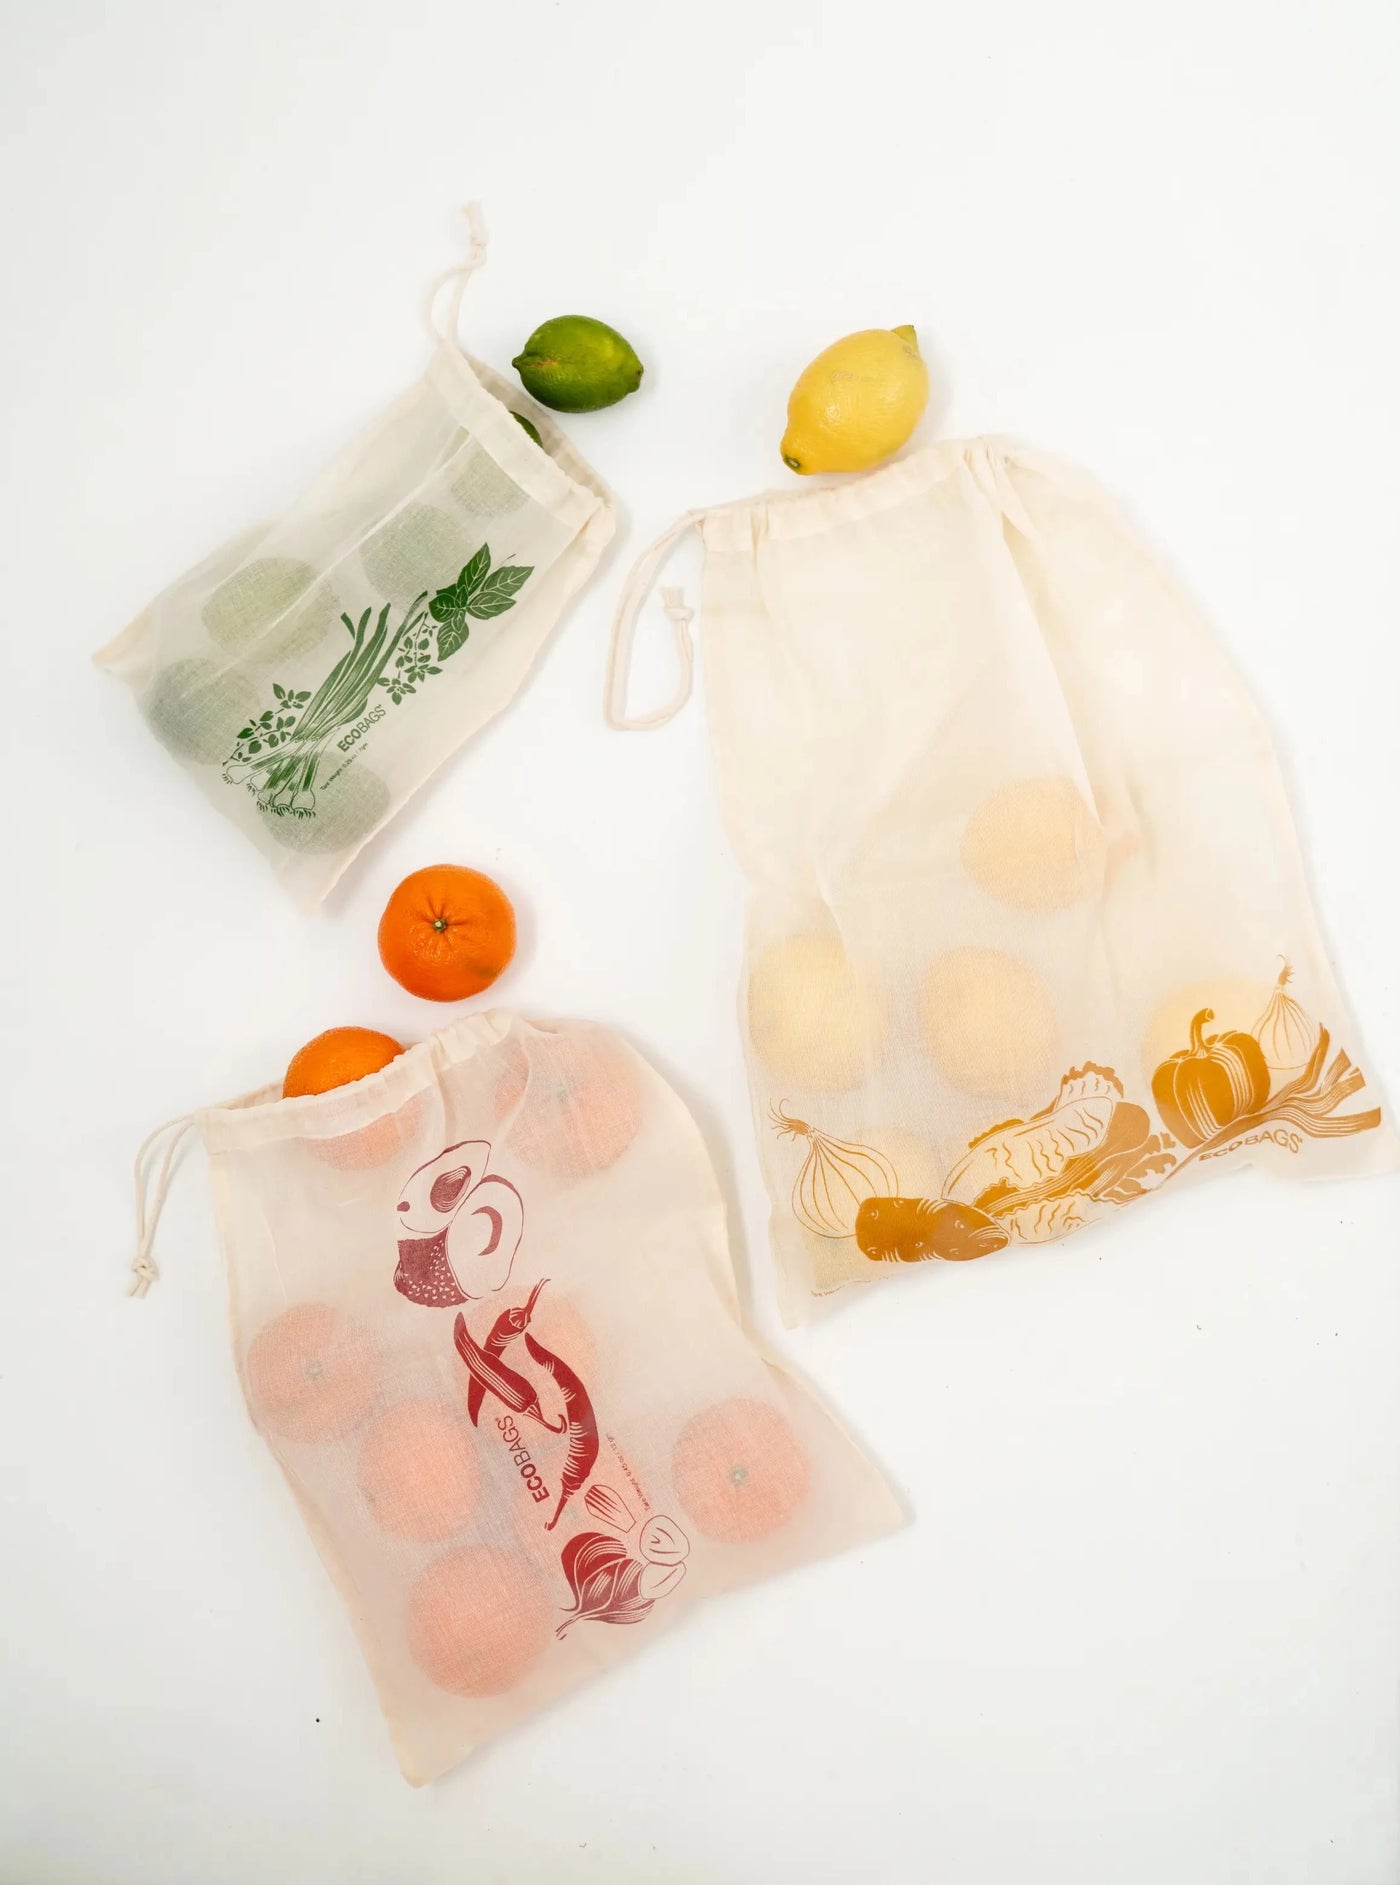 Produce Bags - Set of 3